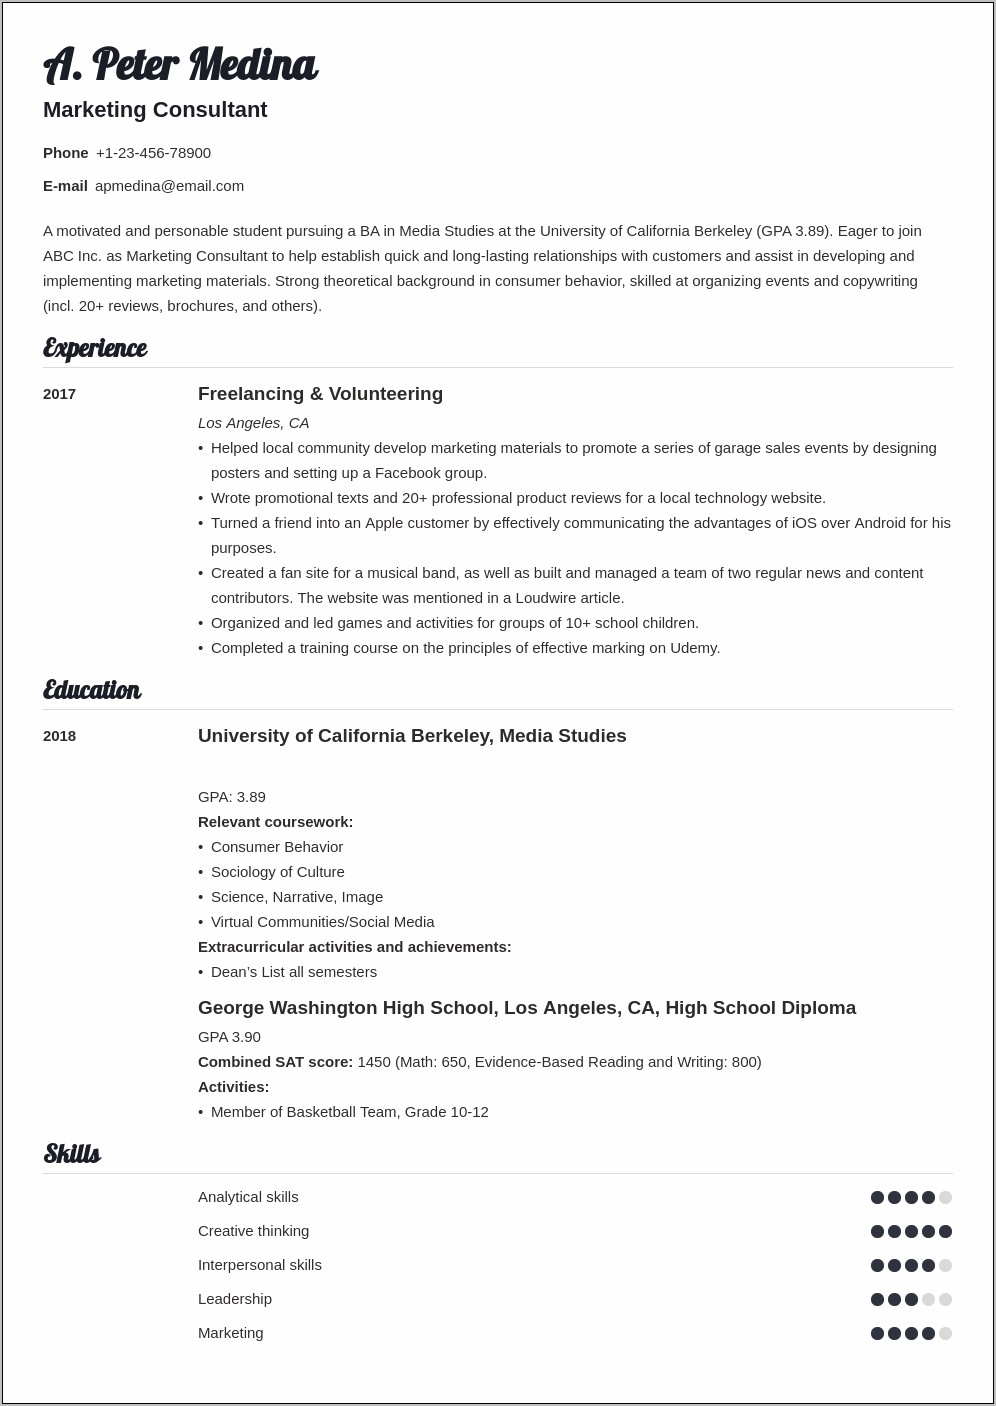 Resume Objective With No Experience Examples